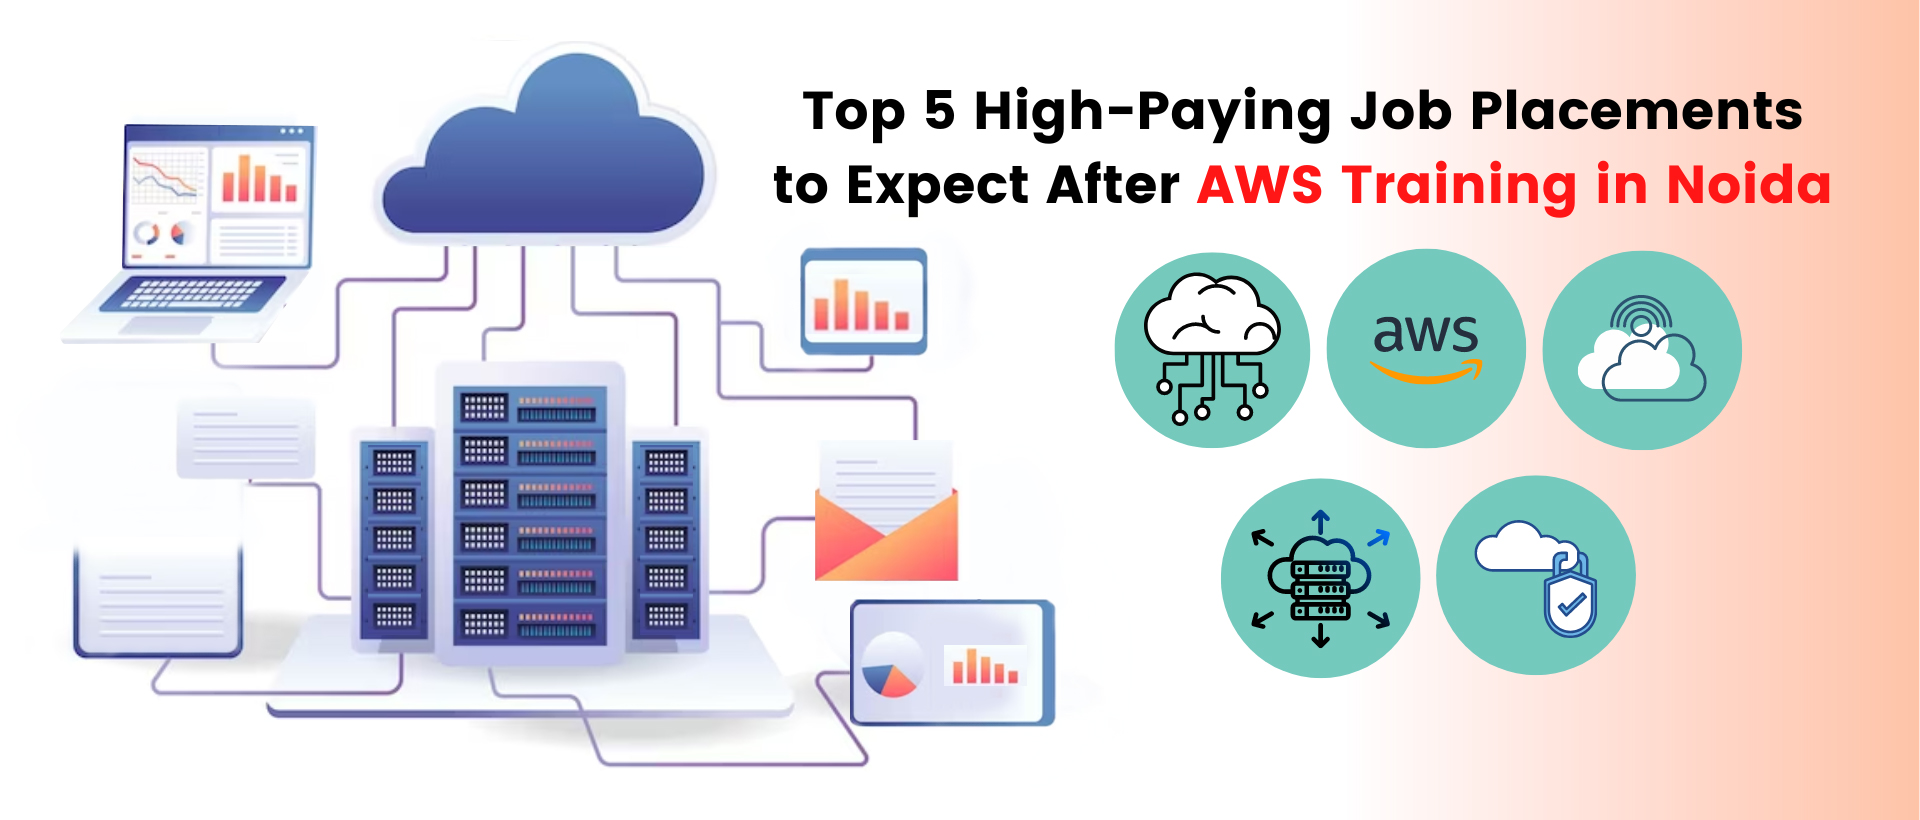 Top 5 high-paying job placements to expect after aws training in noida